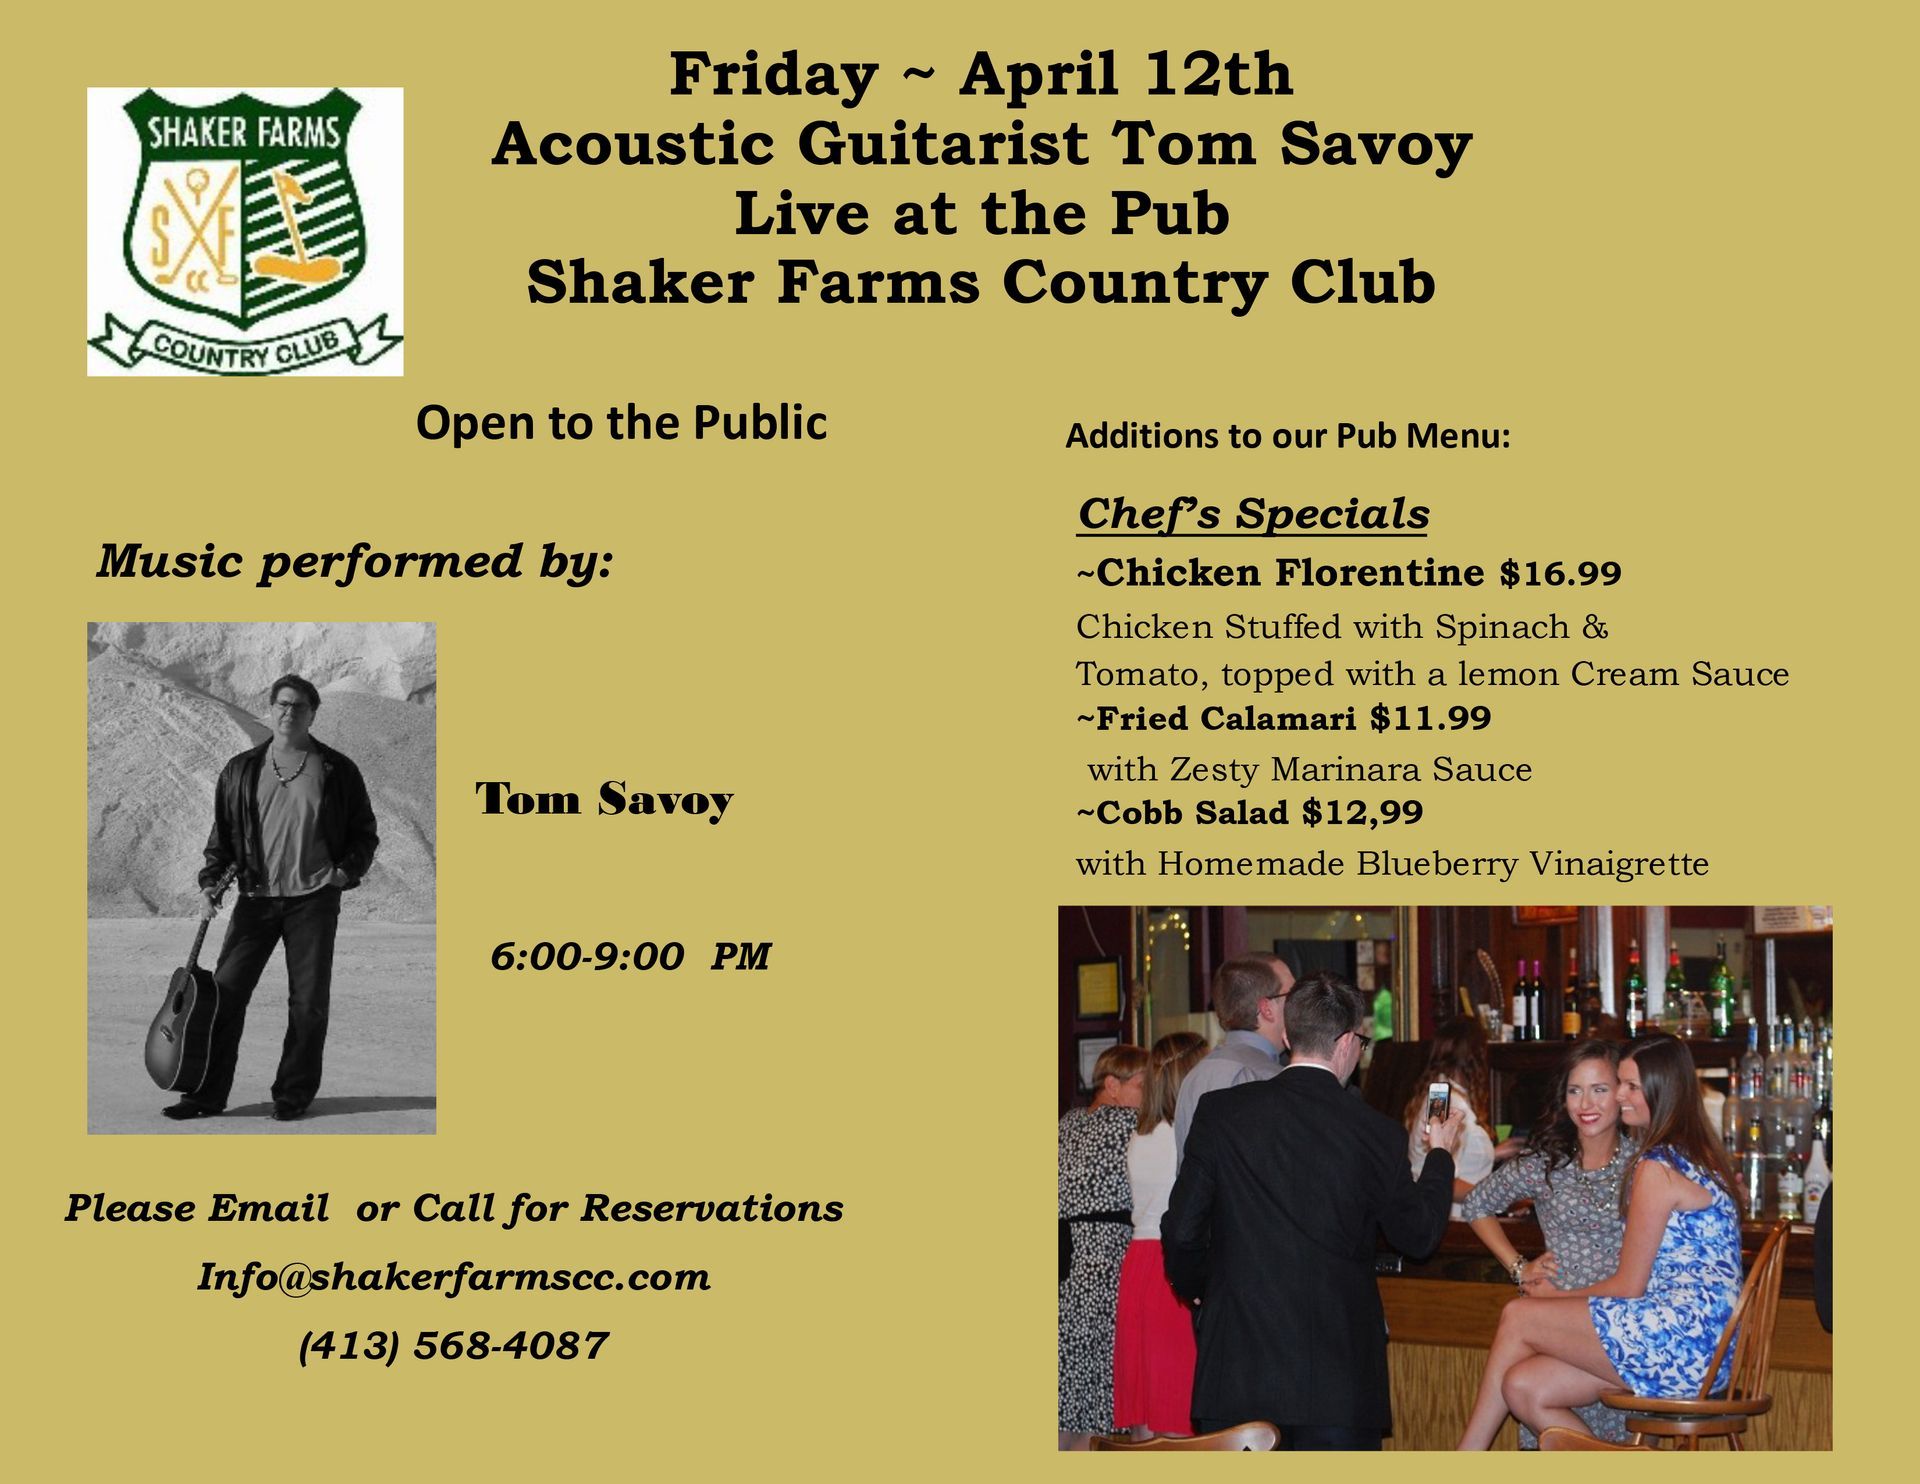 A poster for acoustic guitarist Tom Savoy at Shaker Farms Country Club